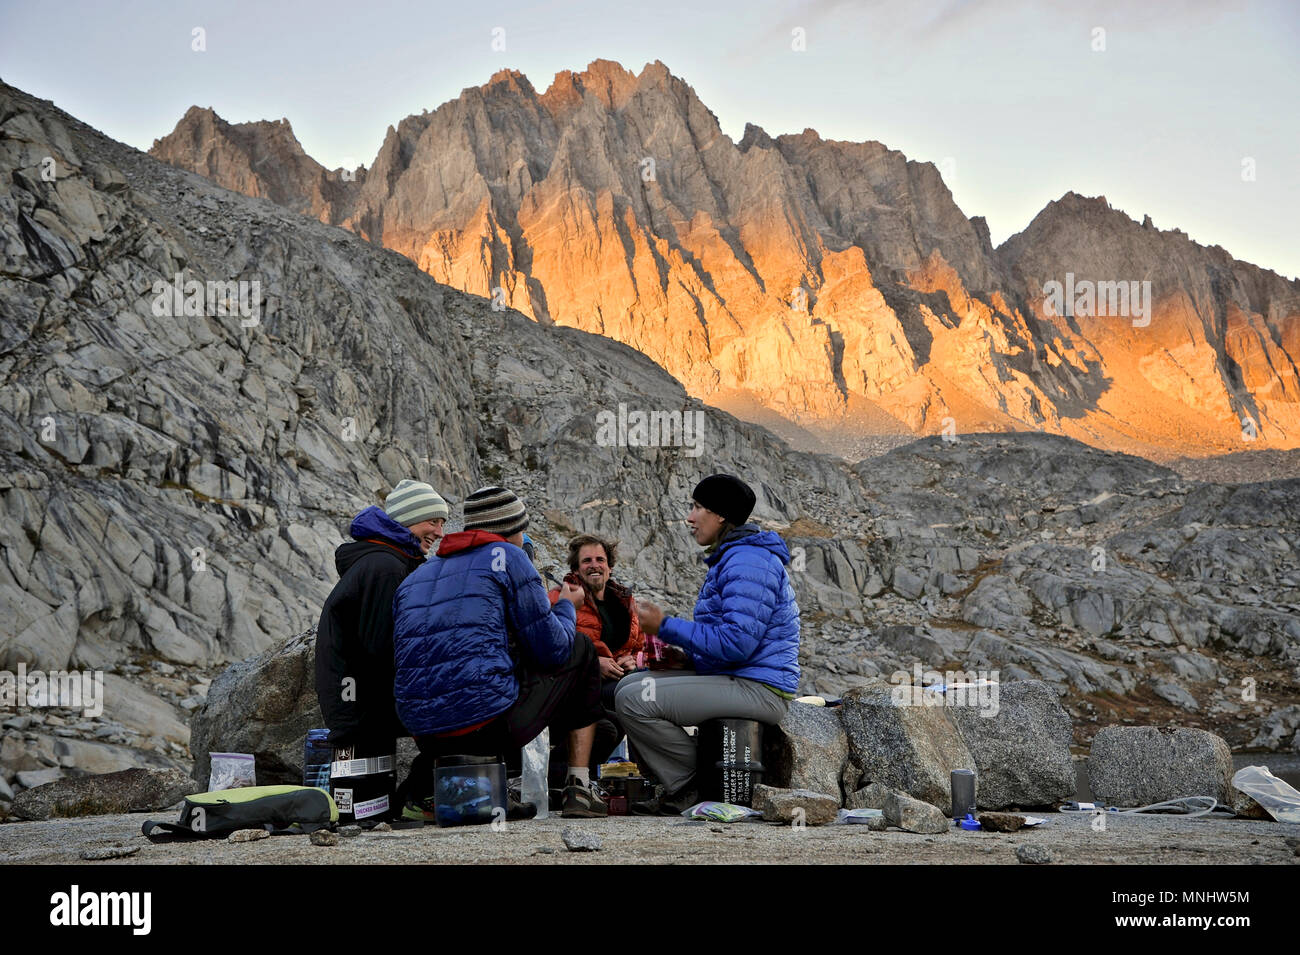 Backpackers have dinner with headlamps sitting at camp on the Barrett Lakes in Palisade Basin on a two-week trek of the Sierra High Route in Kings Canyon National Park in California. The 200-mile route roughly parallels the popular John Muir Trail through the Sierra Nevada Range of California from Kings Canyon National Park to Yosemite National Park. Sunset lights up the North Palisade in the background. Stock Photo